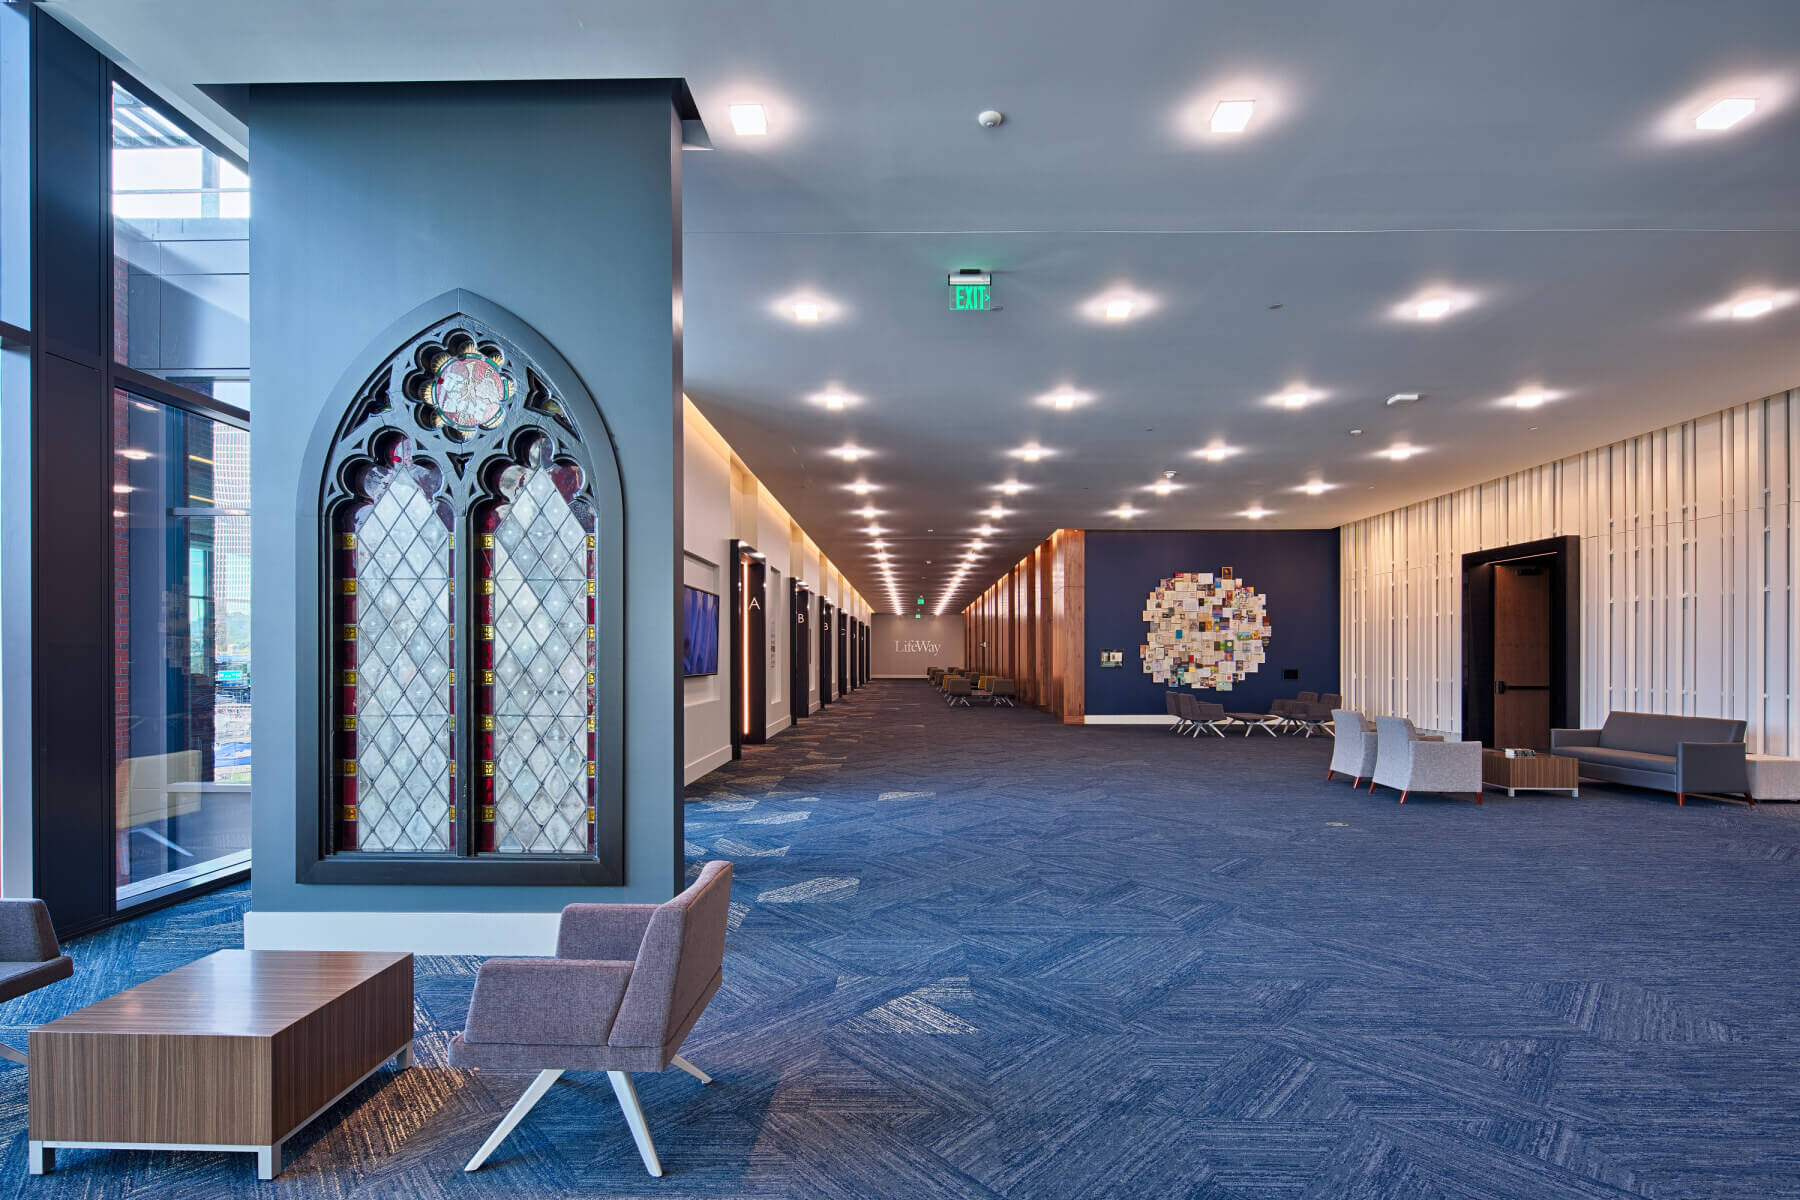 A hallway in the LifeWay Christian Resources building with chairs and a stained glass installation